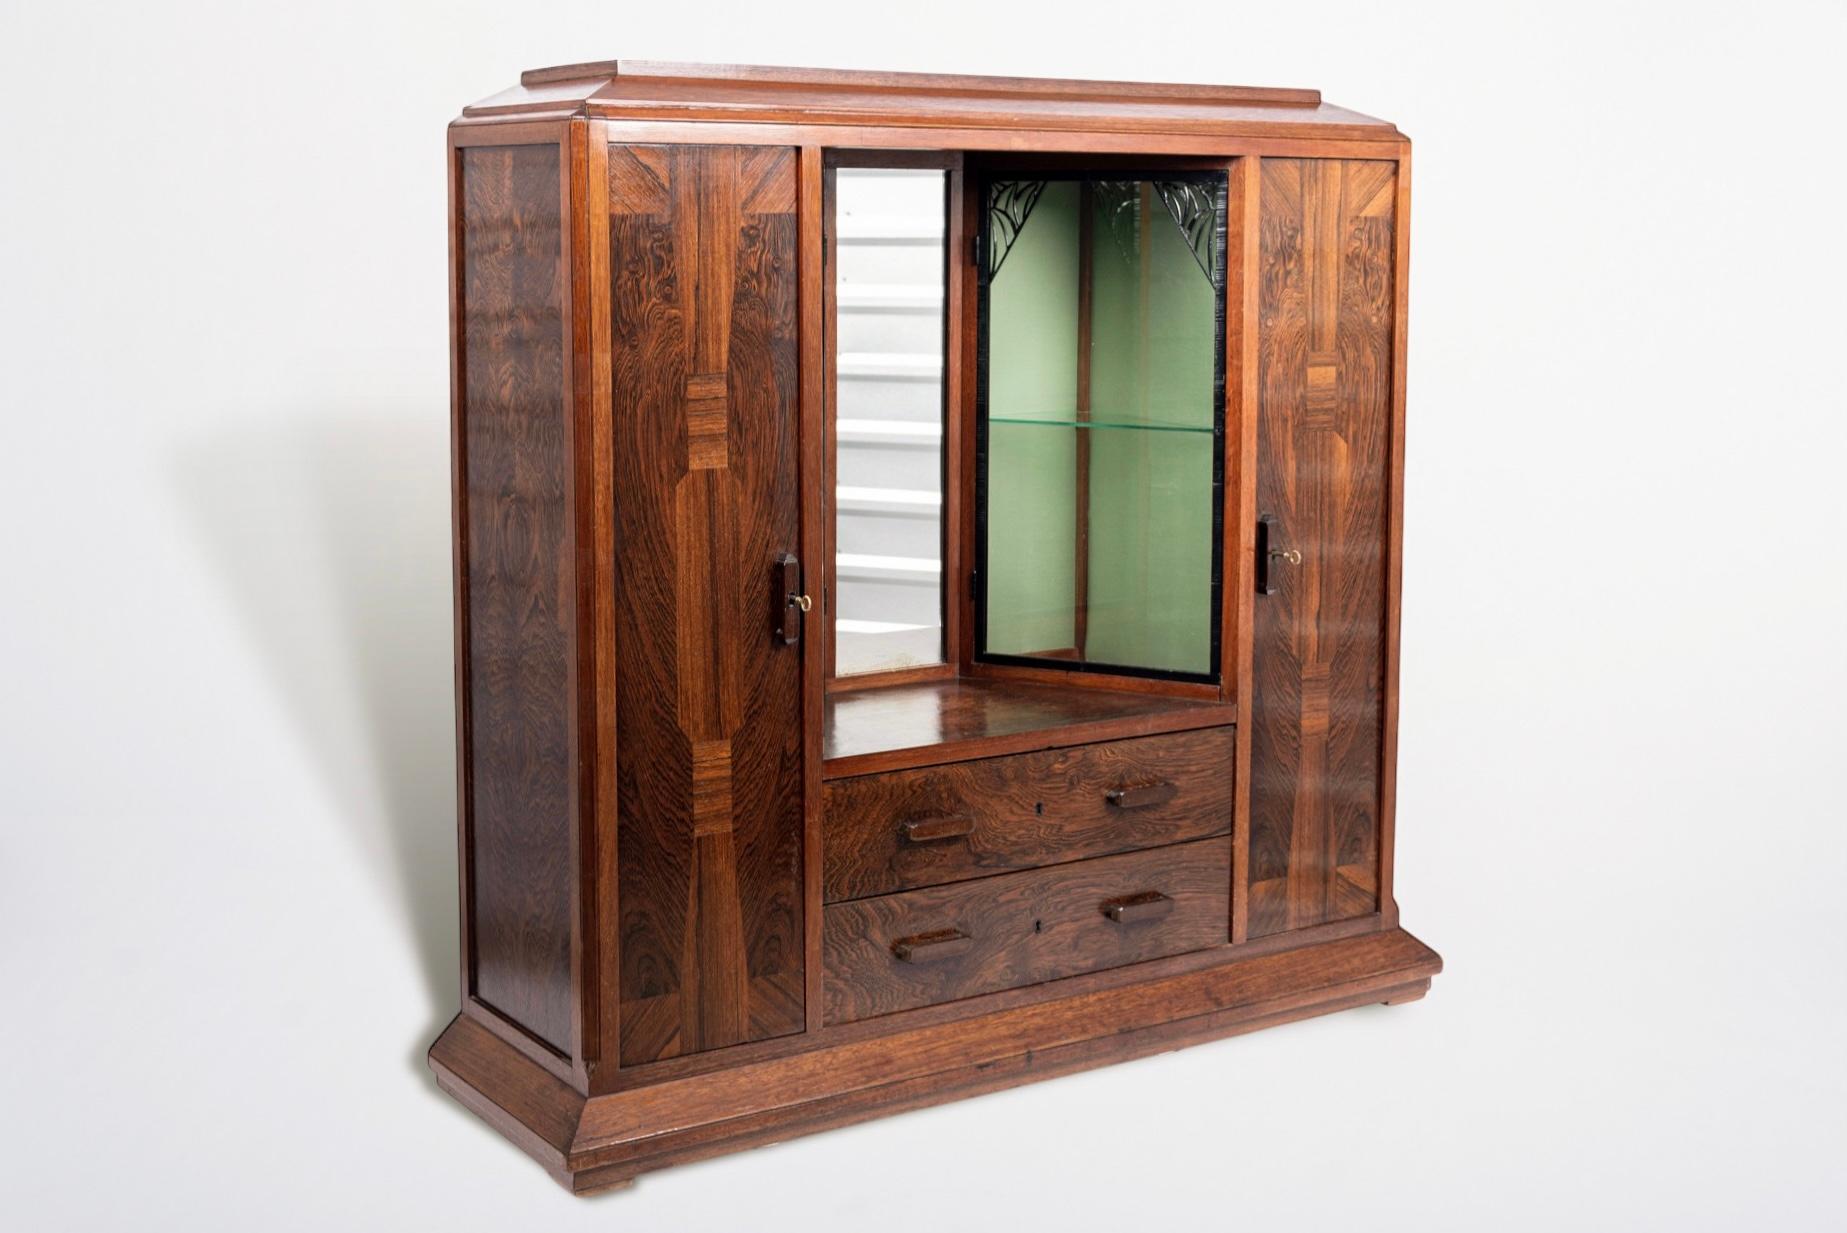 This exquisite French antique Art Deco wood and glass showcase or vitrine display cabinet by Ateliers Gauthier Poinsignon was made in Nancy, France circa 1920-1930. This exceptional cabinet displays the new, more geometric Art Deco style with strong